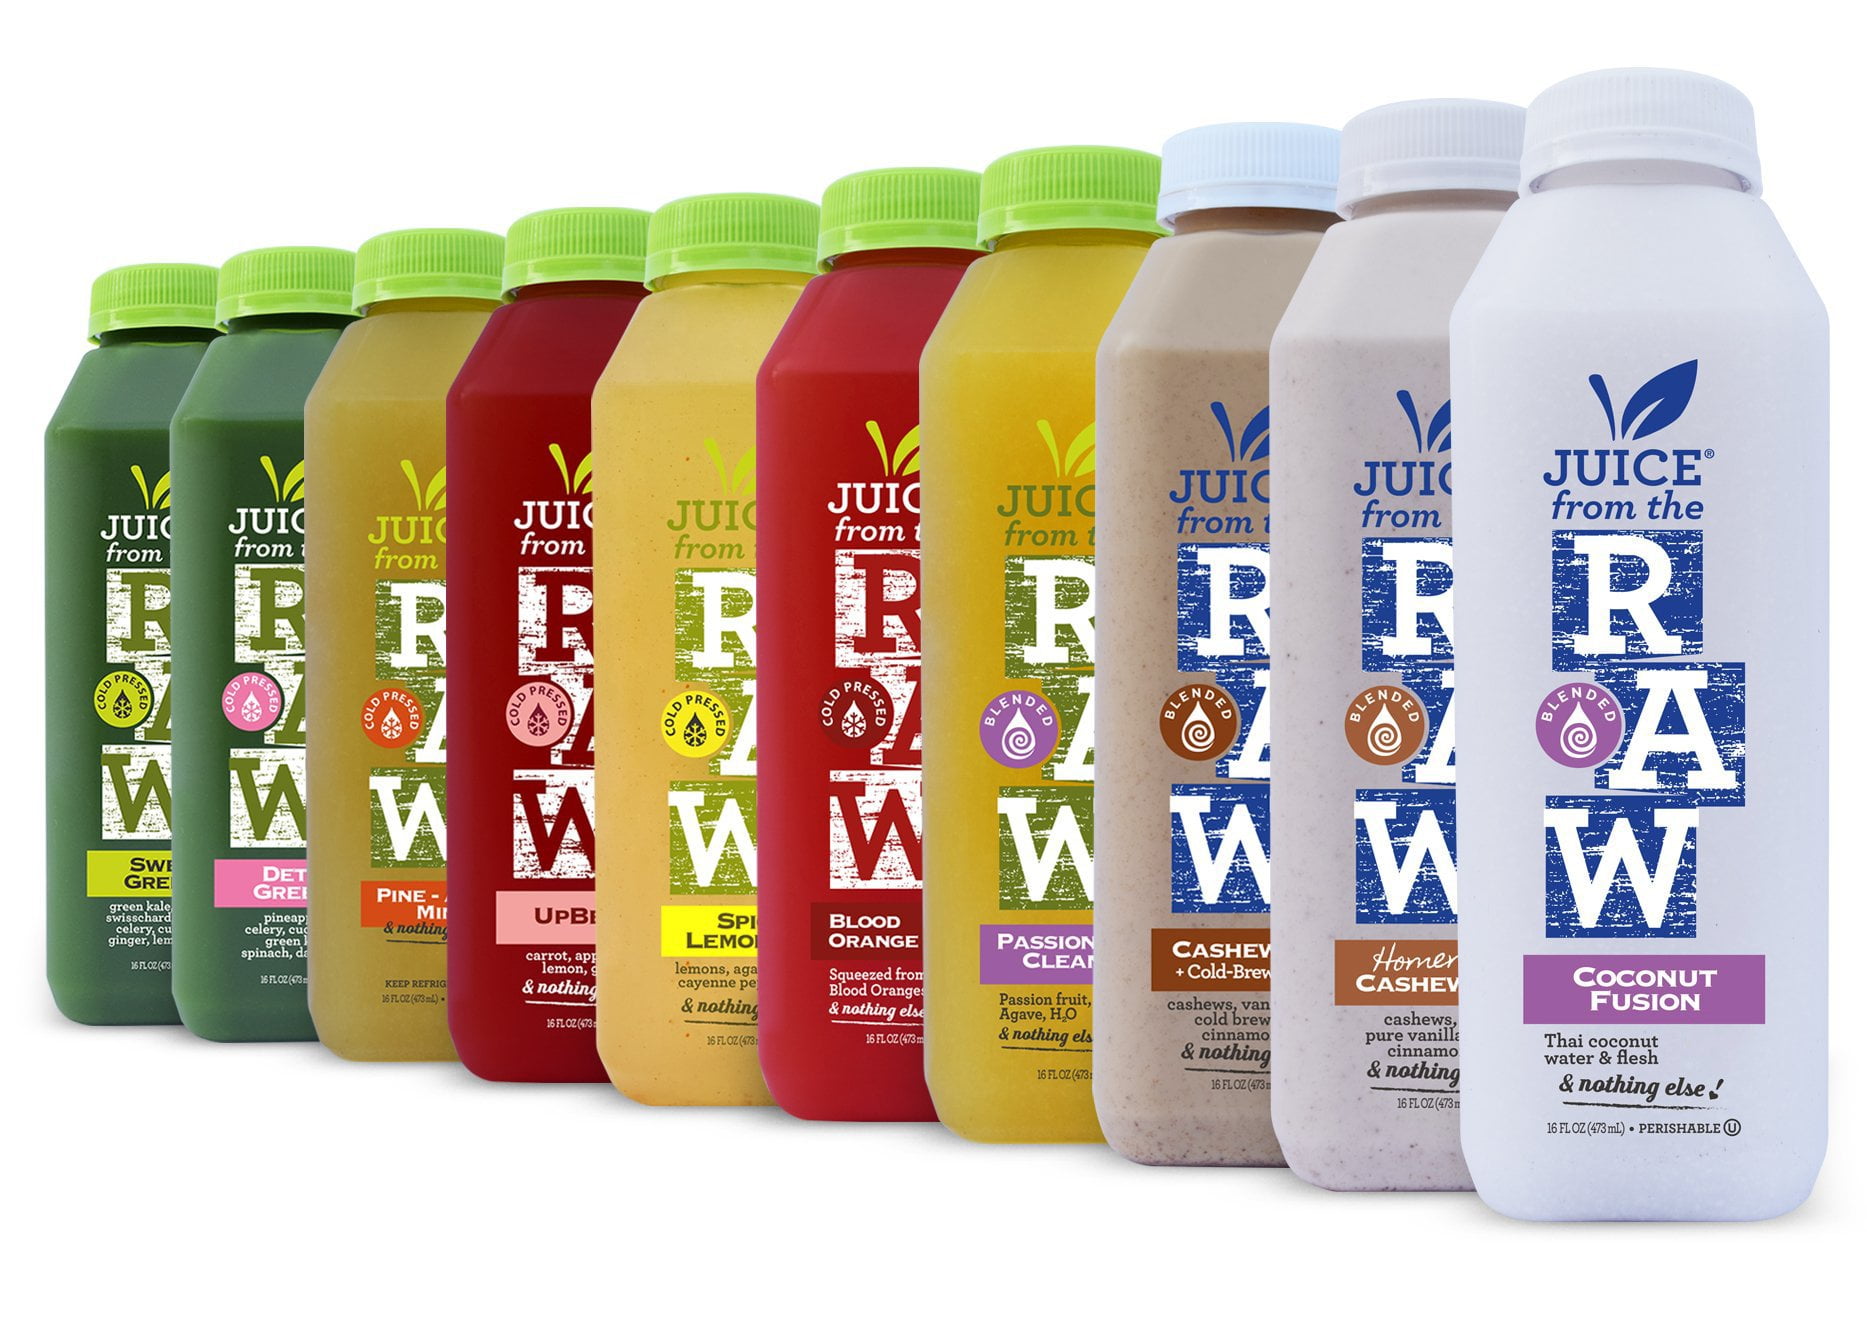 5-Day Juice Cleanse by Juice From the RAW® - Most Popular Juice Cleanse